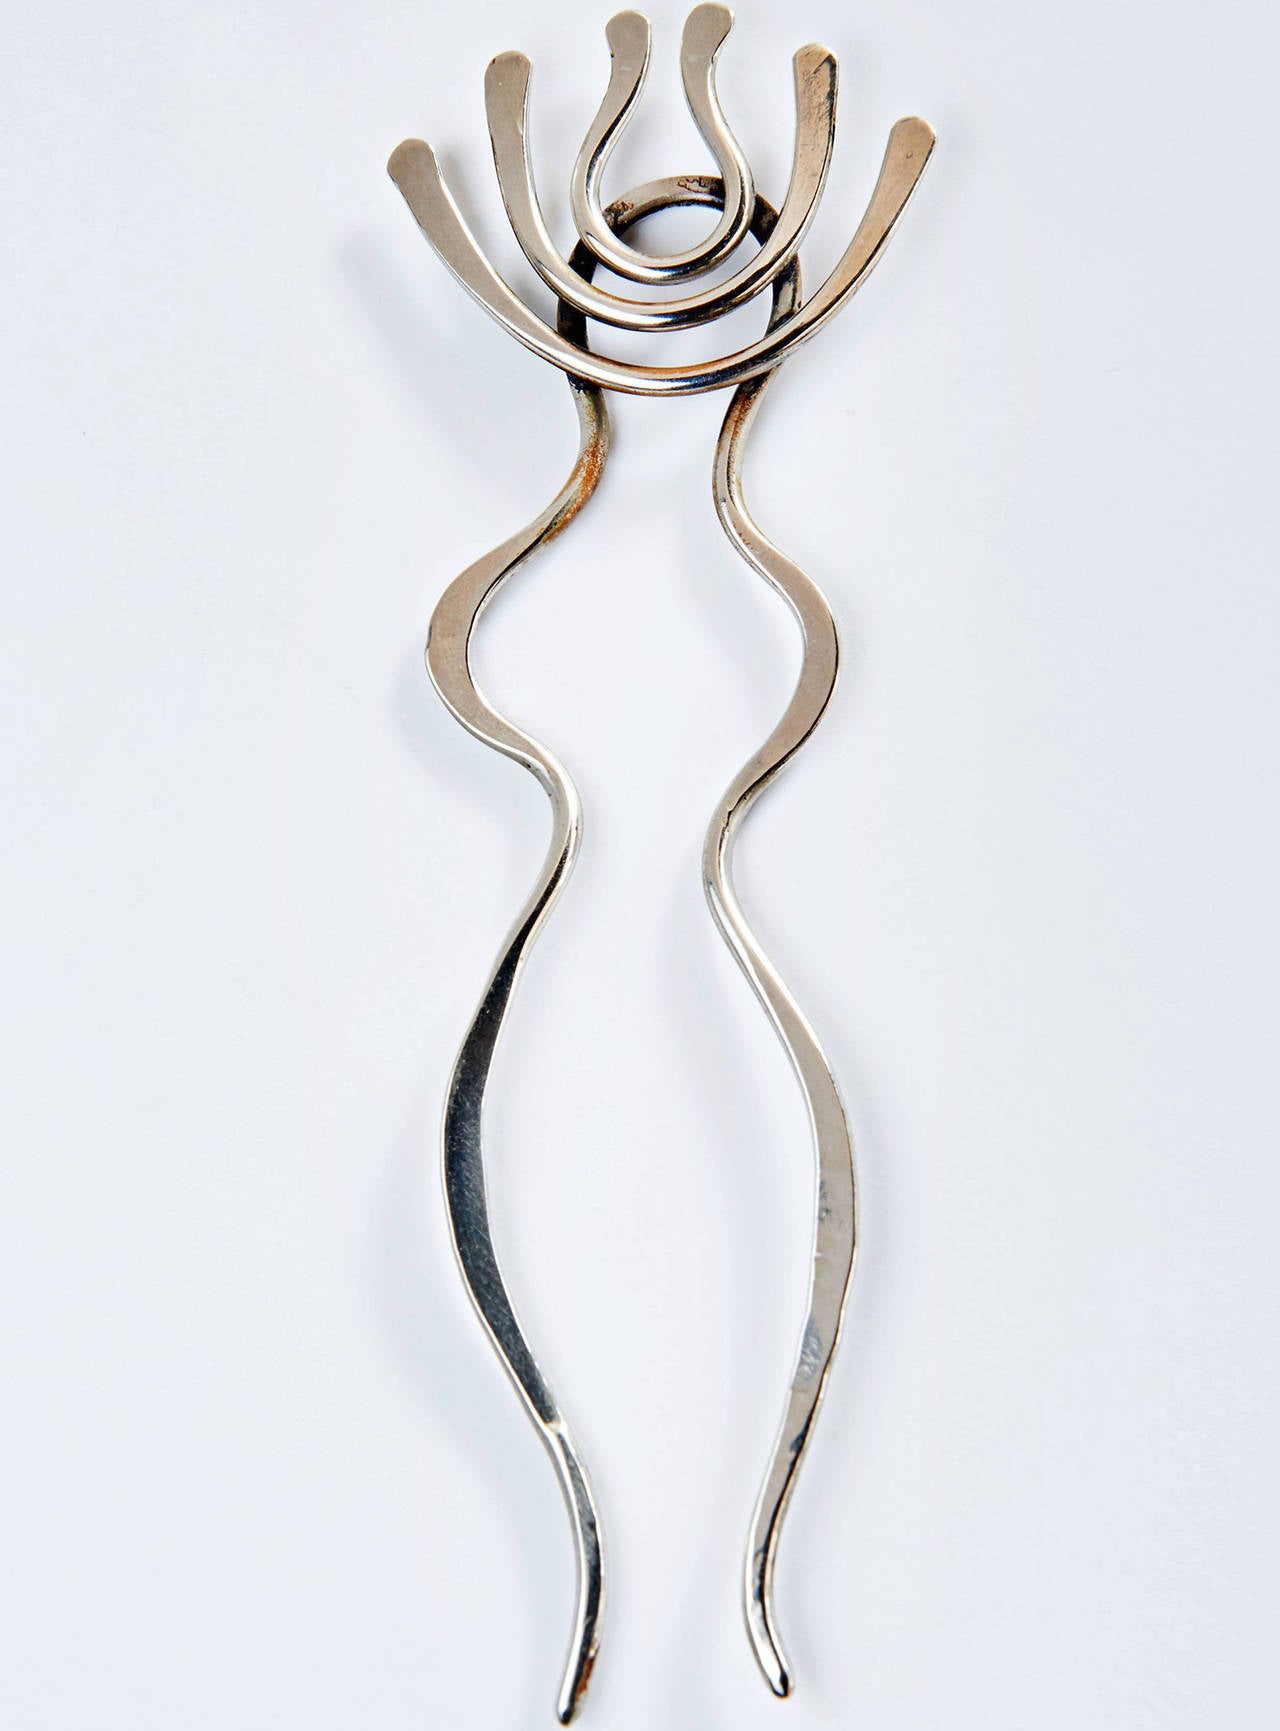 This silver hair pin also happens to be a beautiful abstract sculpture which hints at being a female figure. When not in use atop your head, it can be displayed on its bespoke plinth made of solid Makassar ebony (possibly the rarest, most luxurious